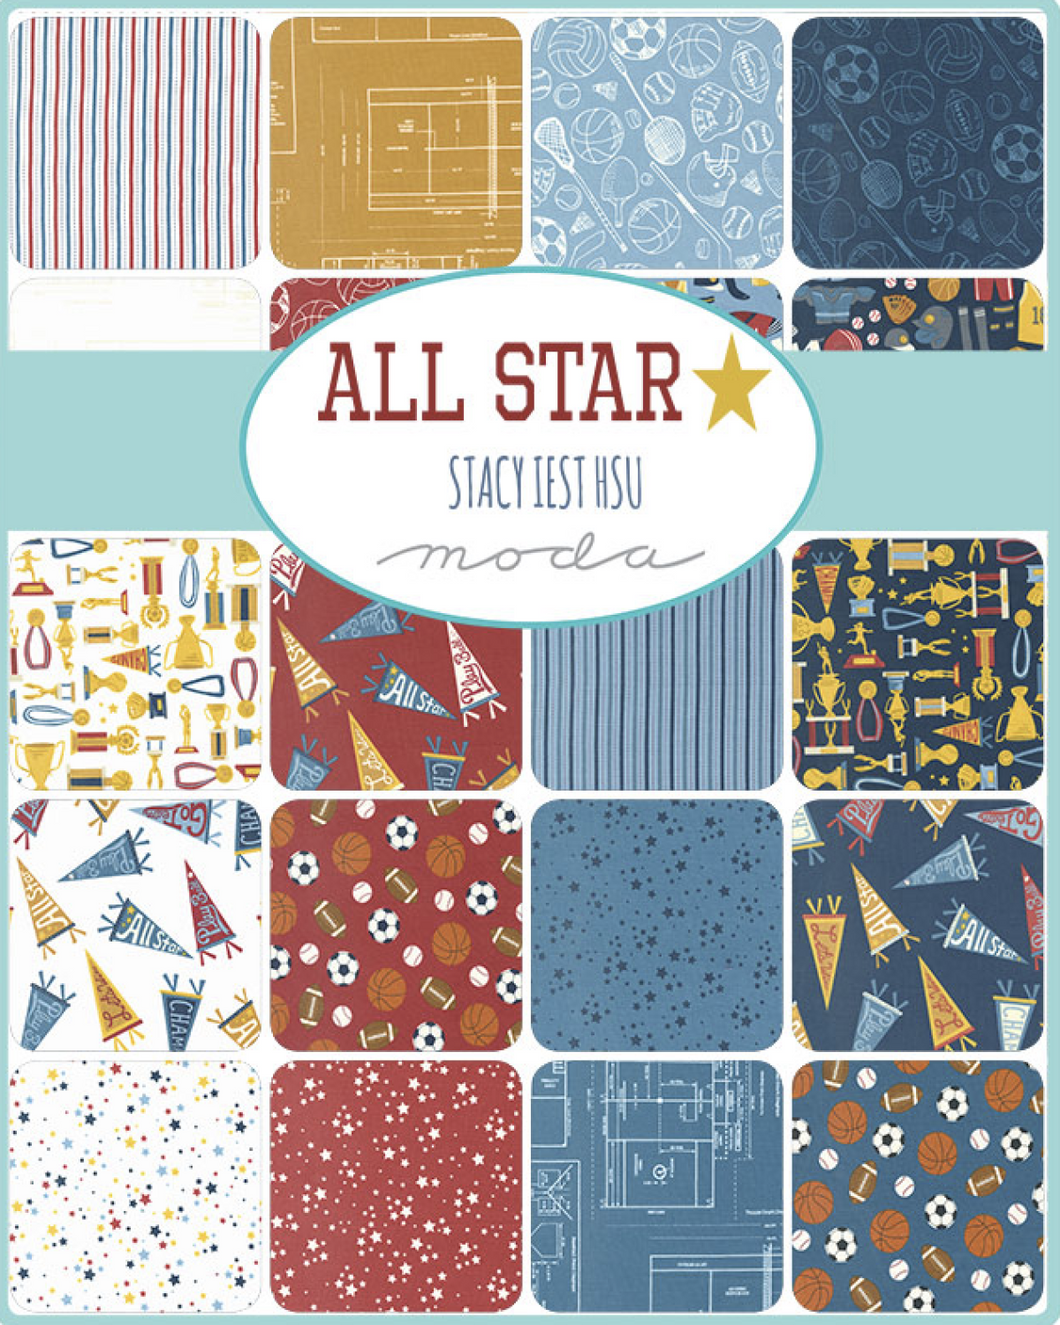 All Star CHARM PACK by Stacy Iest Hsu for Moda Fabrics